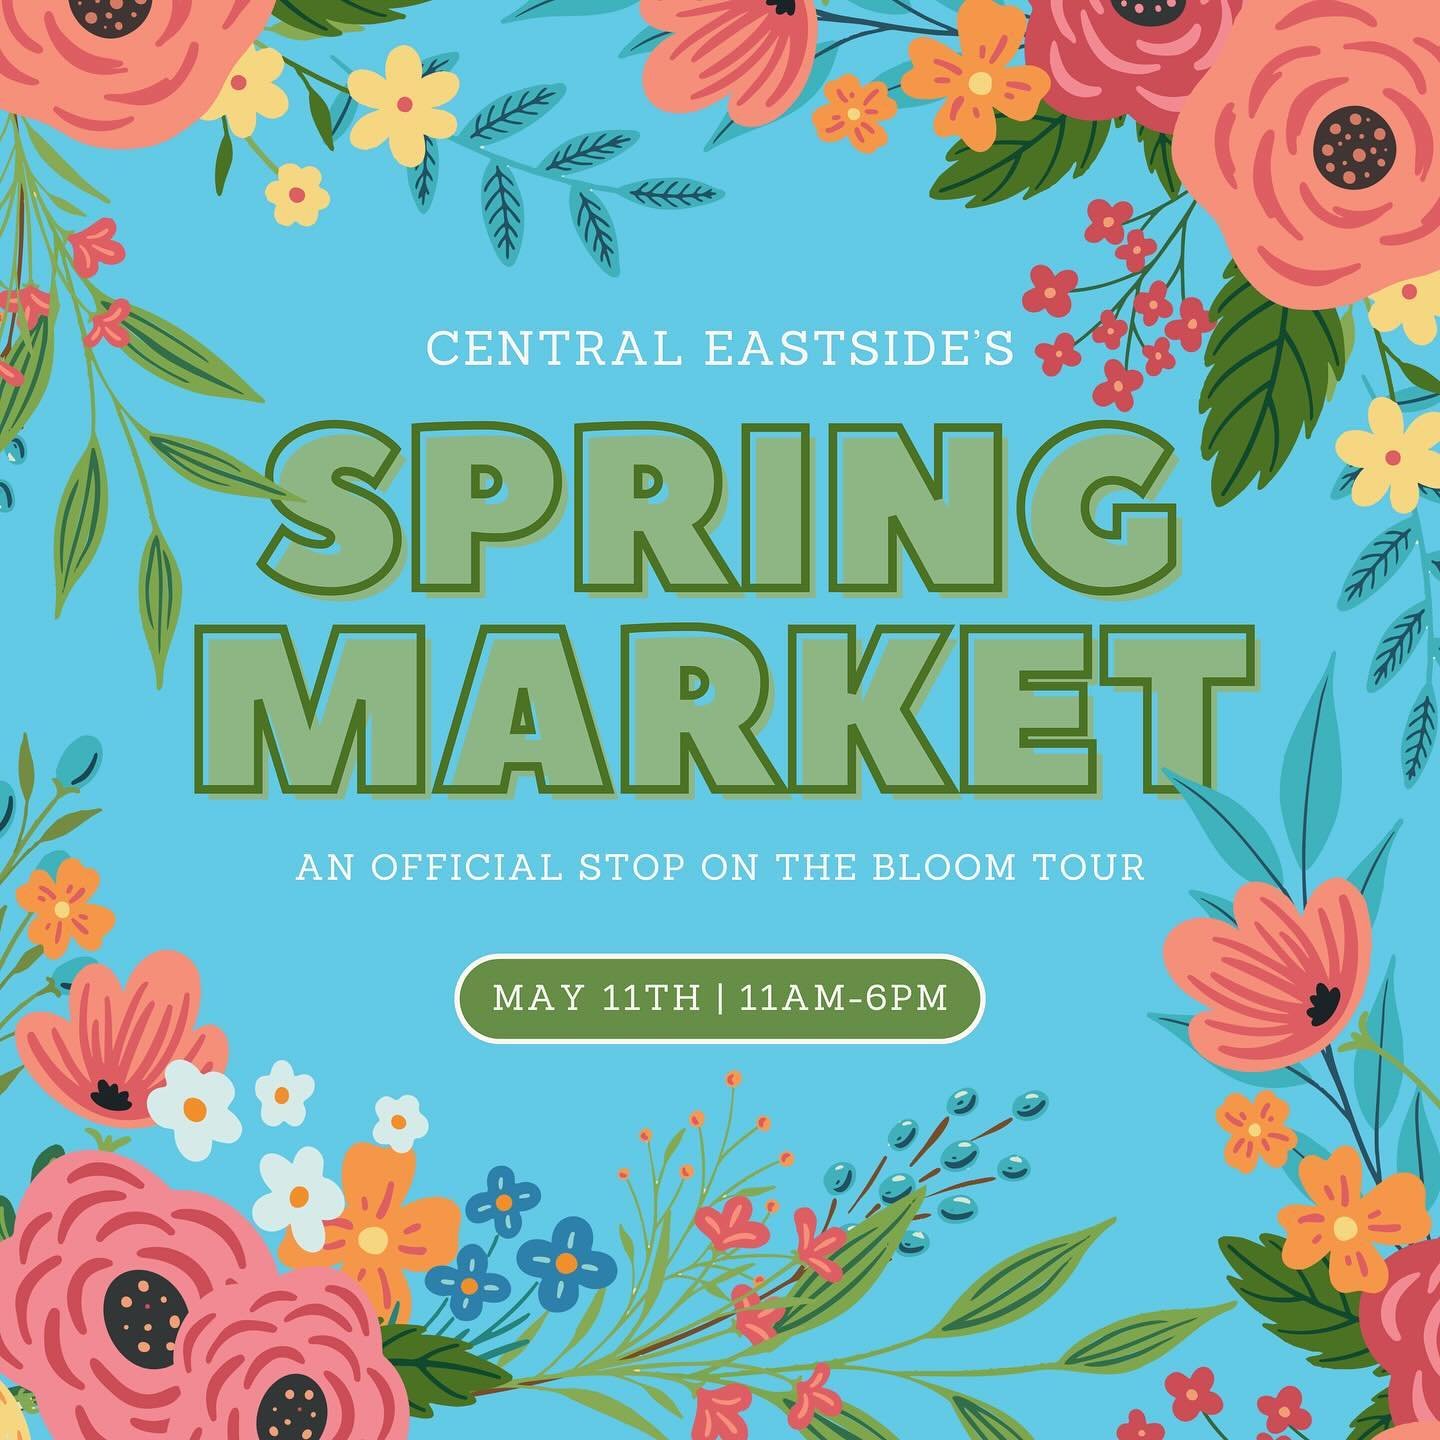 🌹 Save the Date! 🌹
Orange Pippins is hosting a workshop at Central Eastside&rsquo;s Spring Market as part of Portland&rsquo;s Bloom Tour happening during the Rose Festival! So many fun vendors&mdash;it will be a perfect event to do some Mother&rsqu